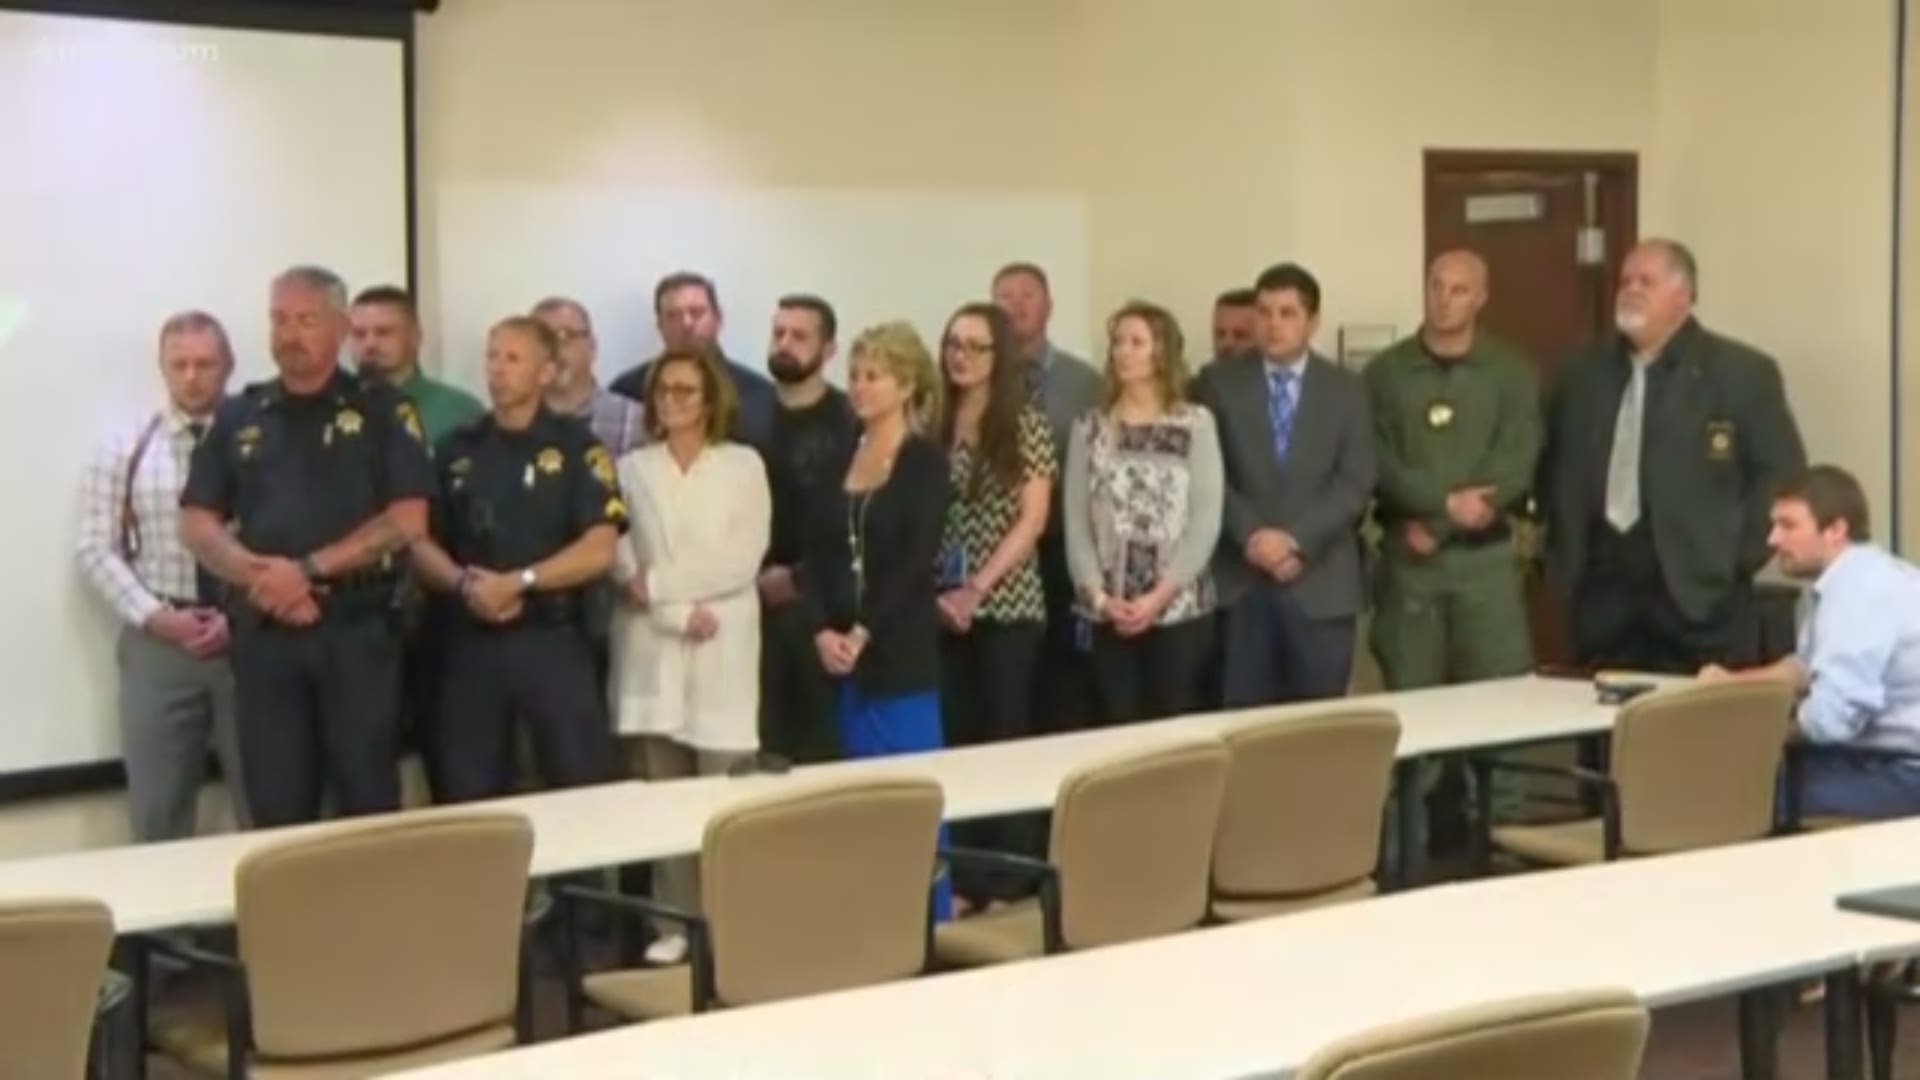 The Douglas County Sheriff’s Office held a press conference after announcing an arrest in a 4th of July hit-and-run crash that killed a bicyclist.